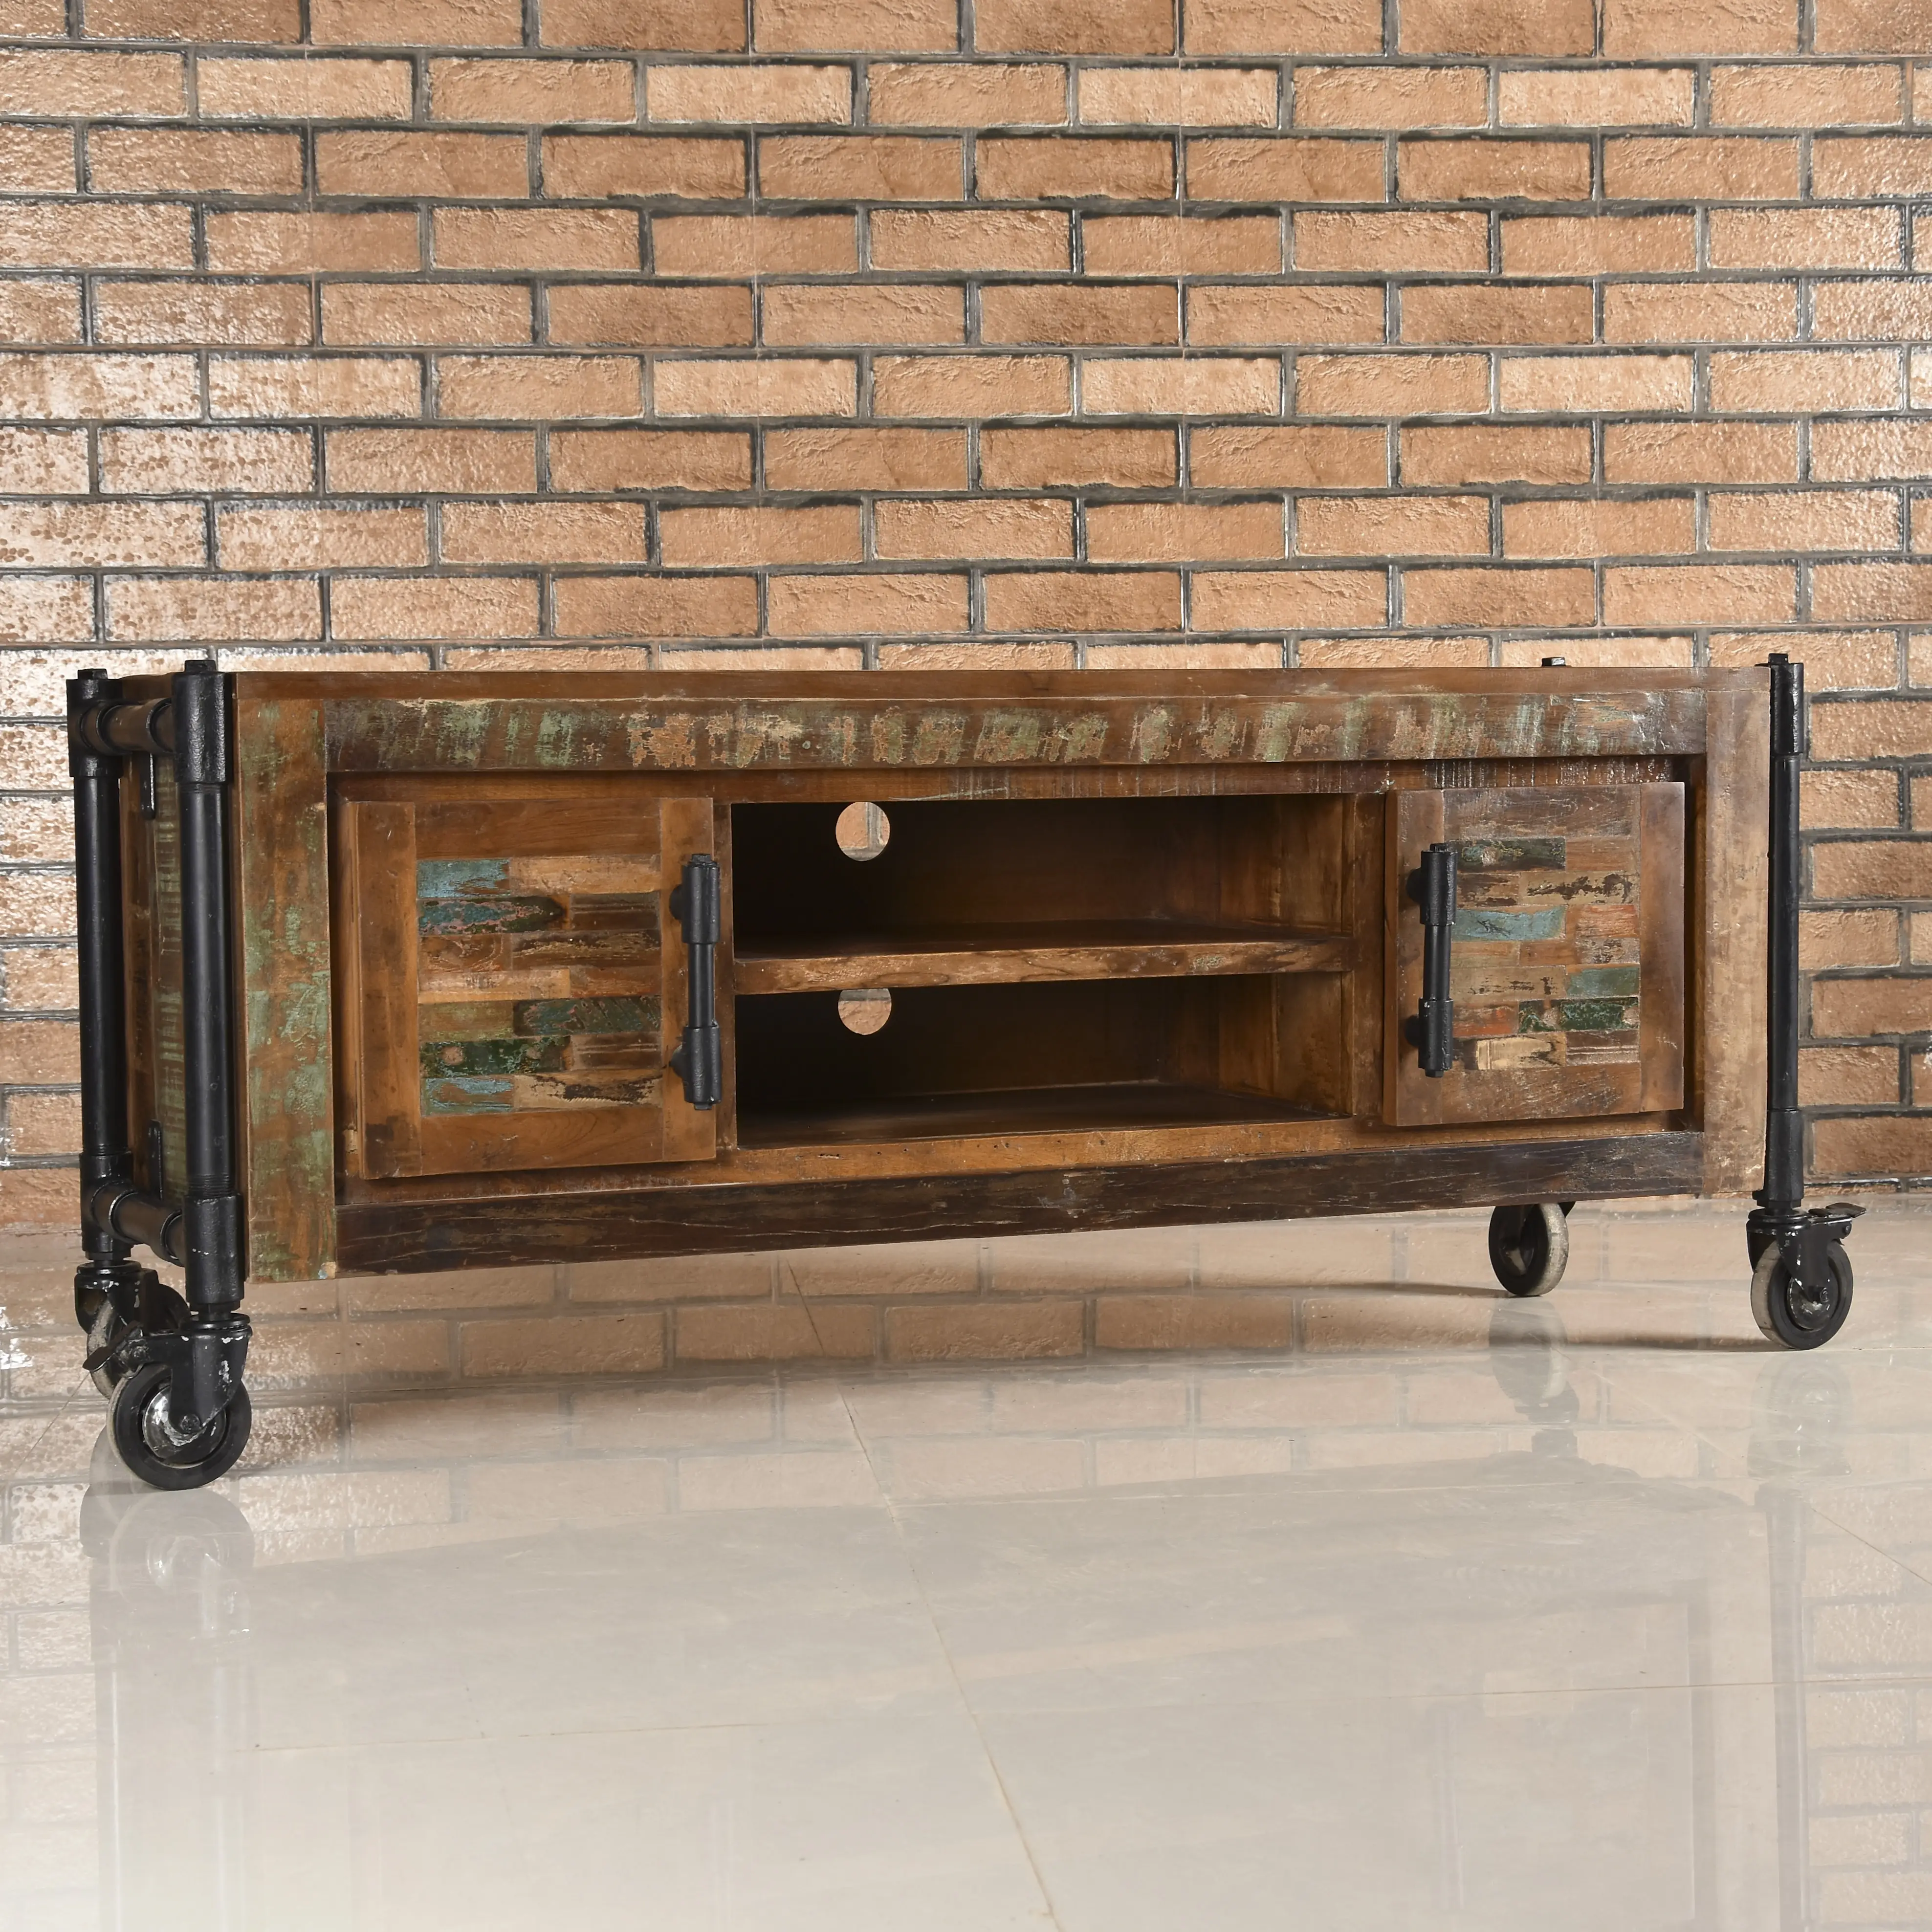 Reclaimed Wood Wide Screen T.V. Cabinet with 2 Doors on Rollers - popular handicrafts